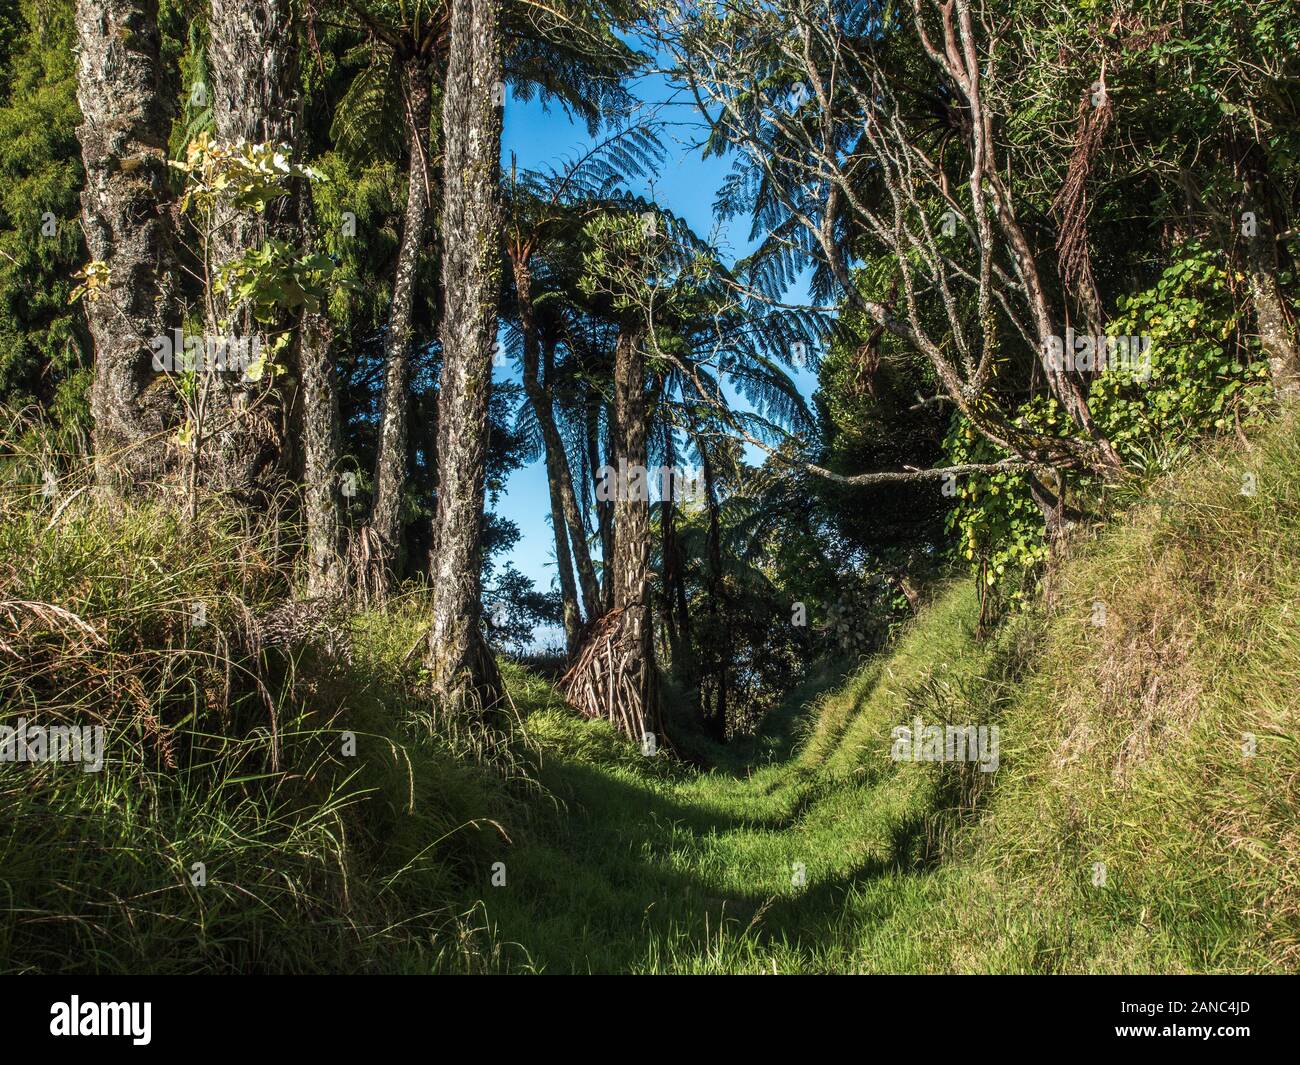 Historic Maori battle site, overgrown remains of entrenchment ditch and bank defensive earthworks fortification, Pukerangiora, Taranaki, New Zealand Stock Photo